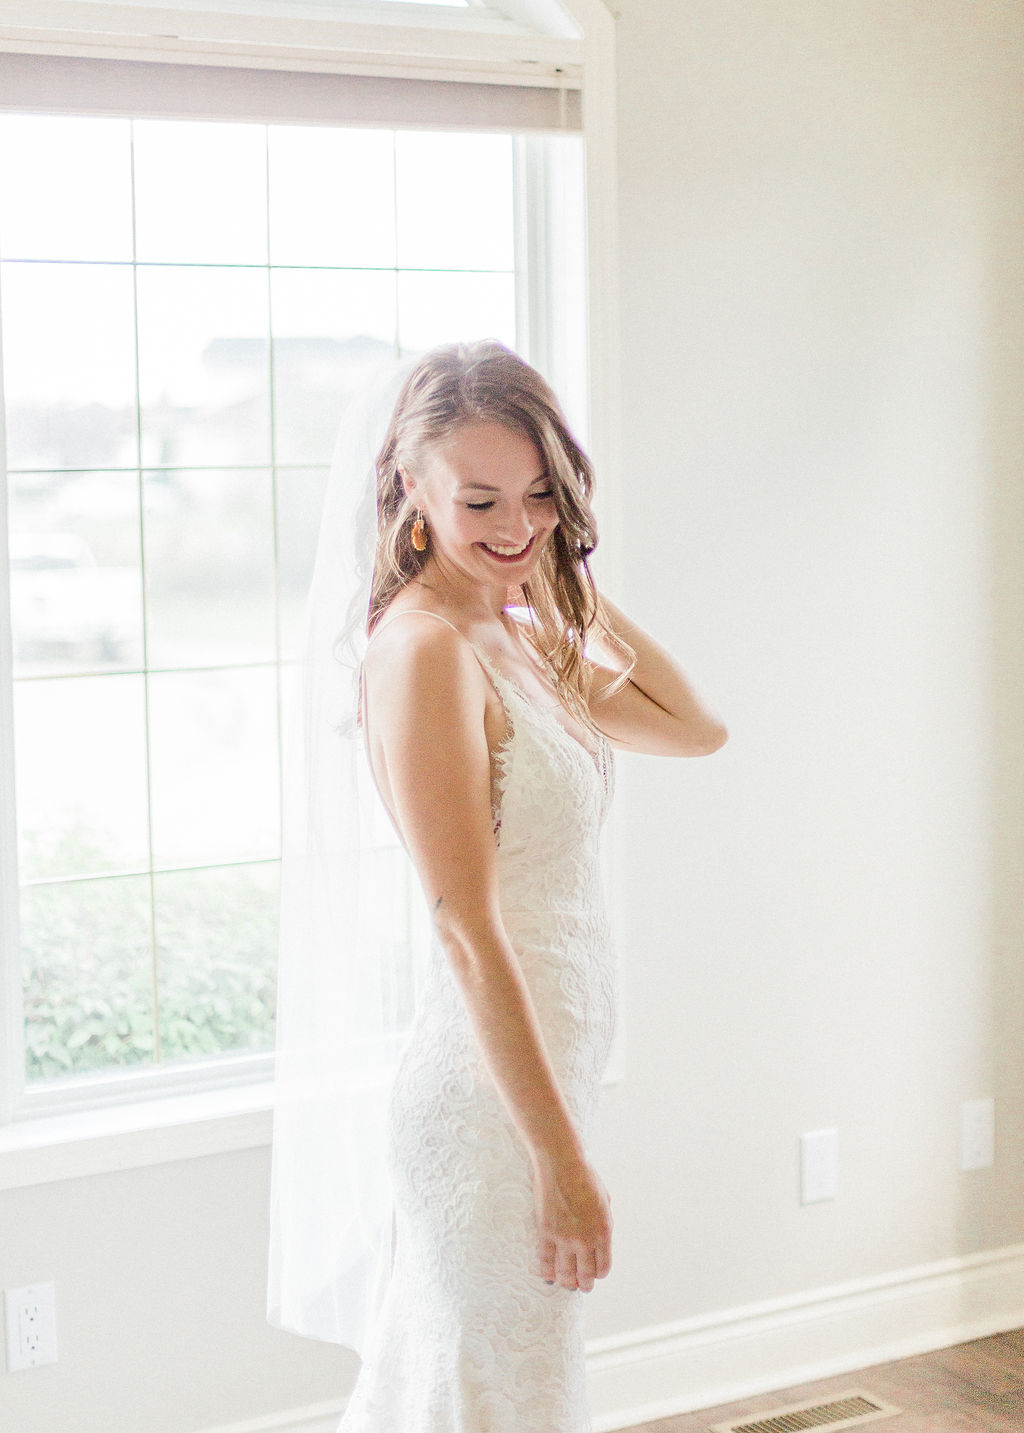 Bride on the morning of her wedding - bridal portrait, intimate wedding